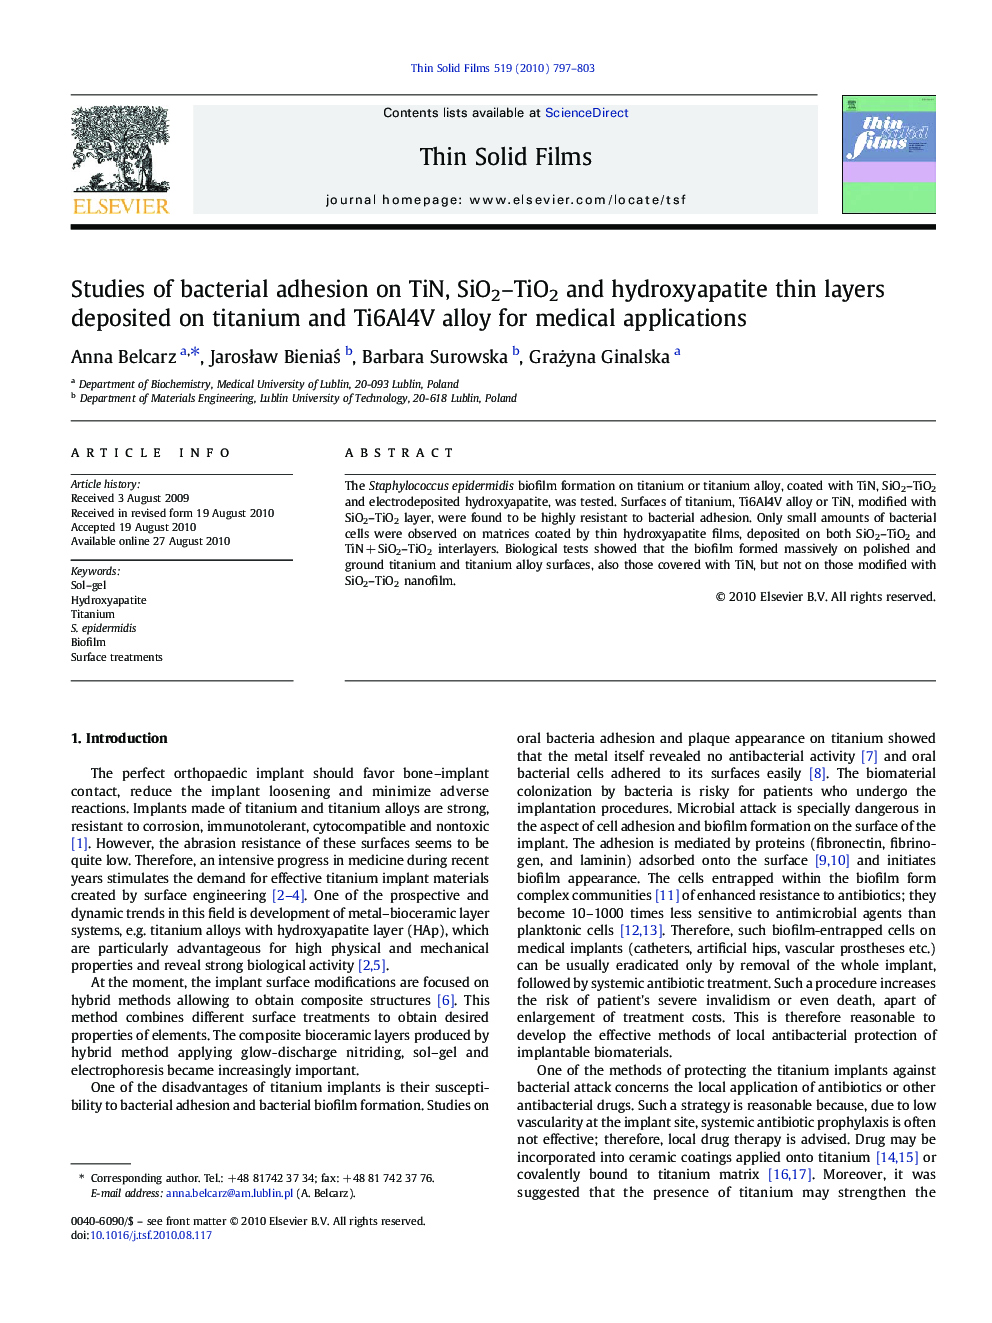 Studies of bacterial adhesion on TiN, SiO2–TiO2 and hydroxyapatite thin layers deposited on titanium and Ti6Al4V alloy for medical applications